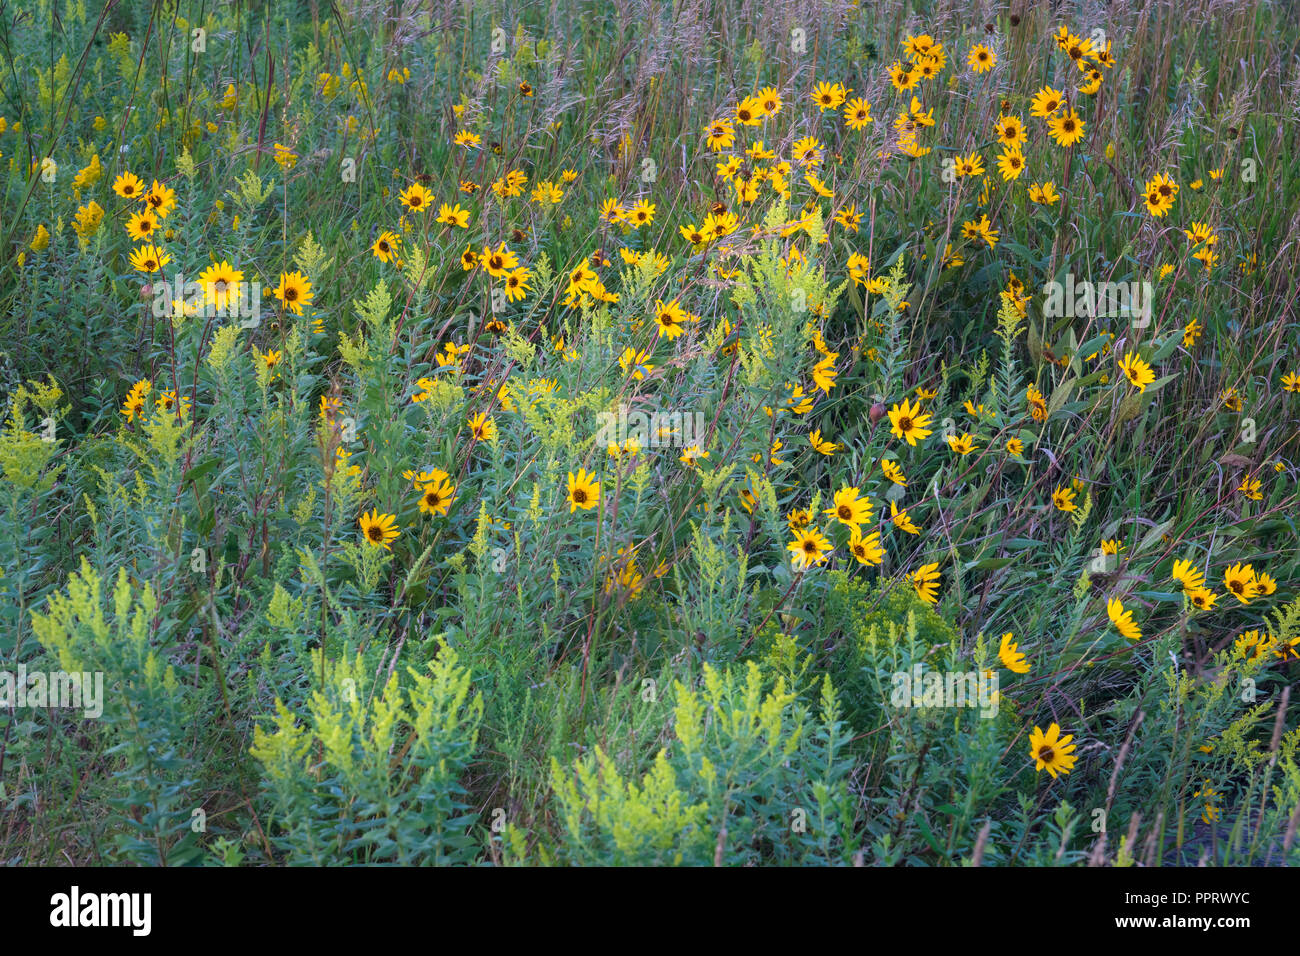 Blue Mounds State Park; Minnesota: Detail of Goldenrod (solidago) and prairie sunflower (Helianthus petiolaris) flowers in a tallgrass prairie Stock Photo